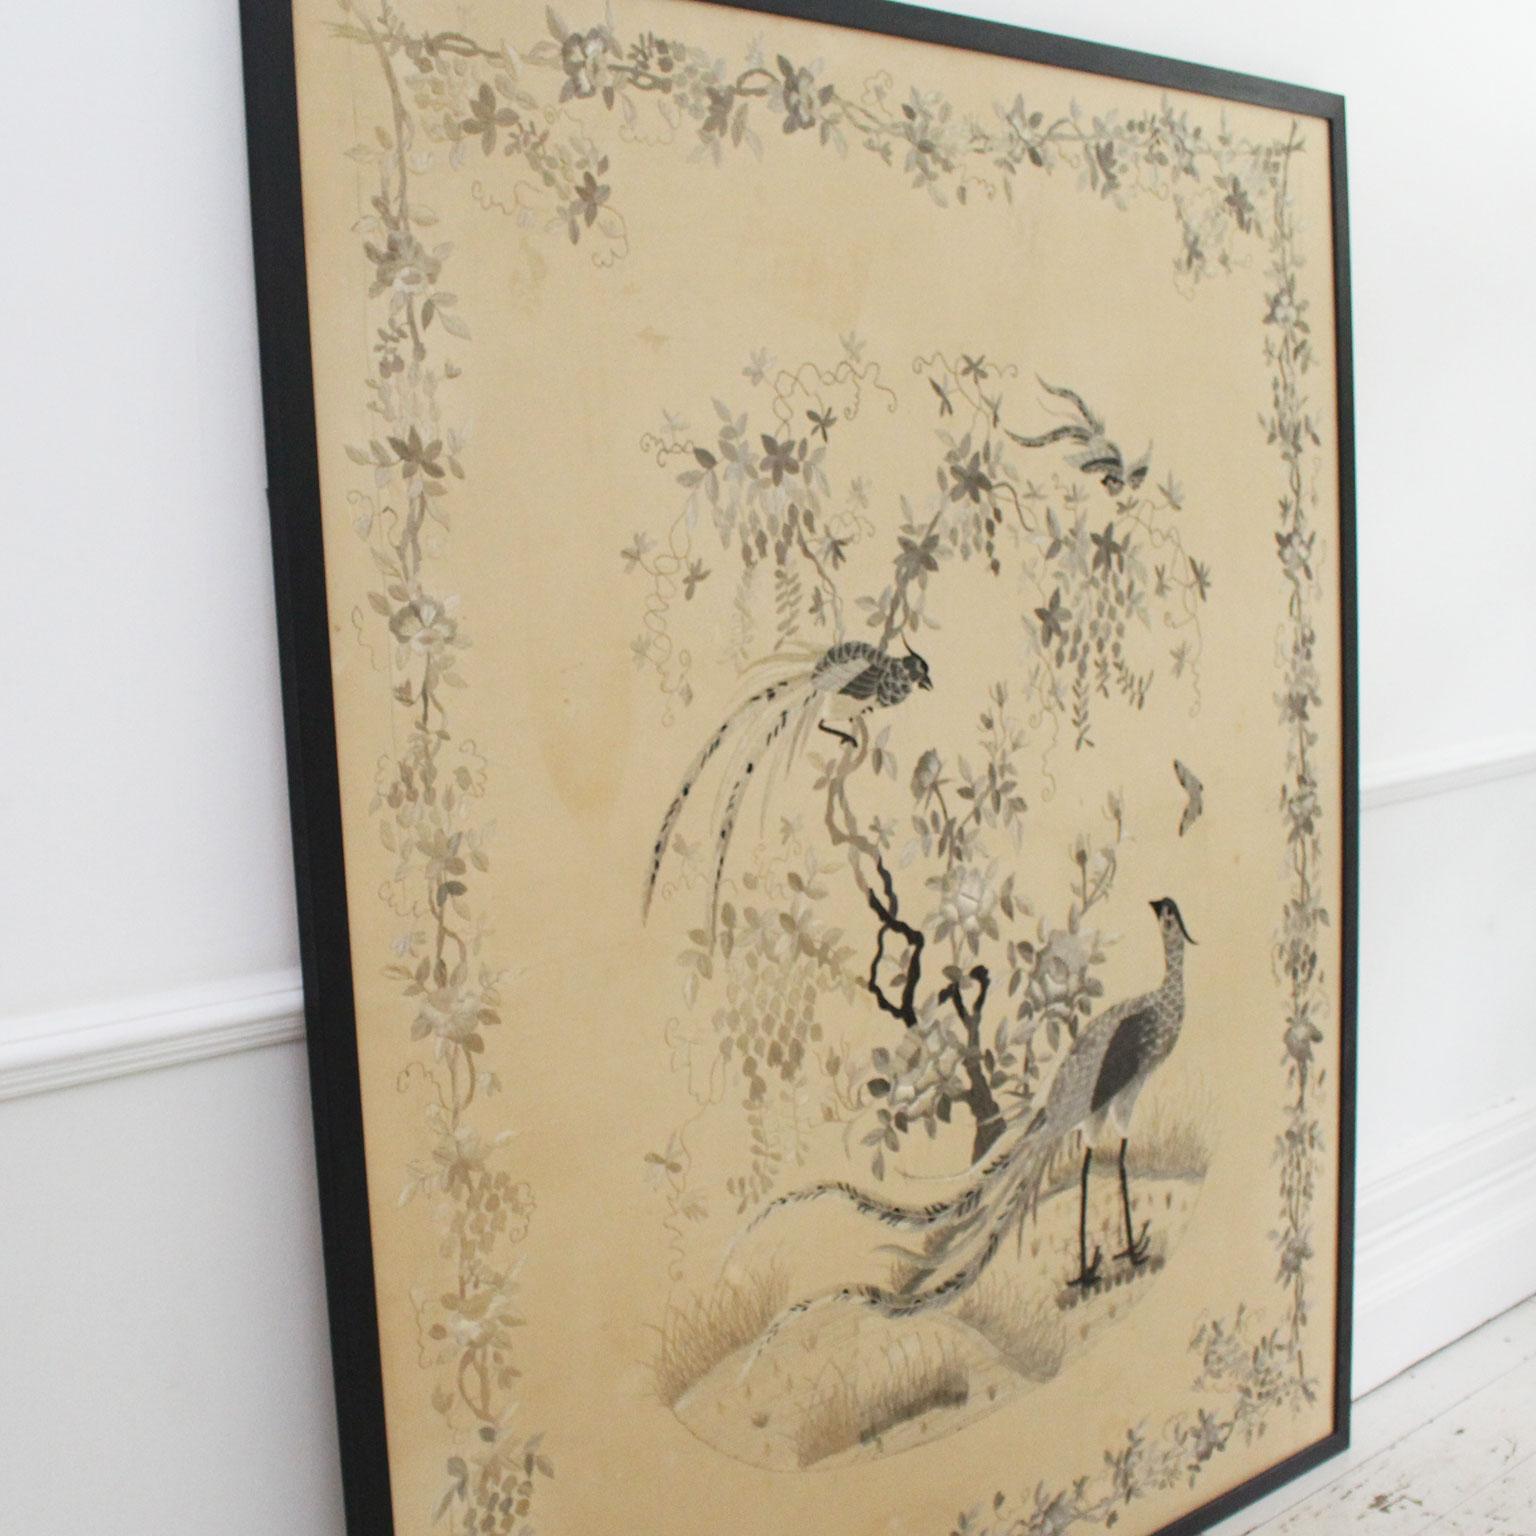 Embroidered Very Large Antique Monochrome Chinese Hand Embroidery in Black Frame